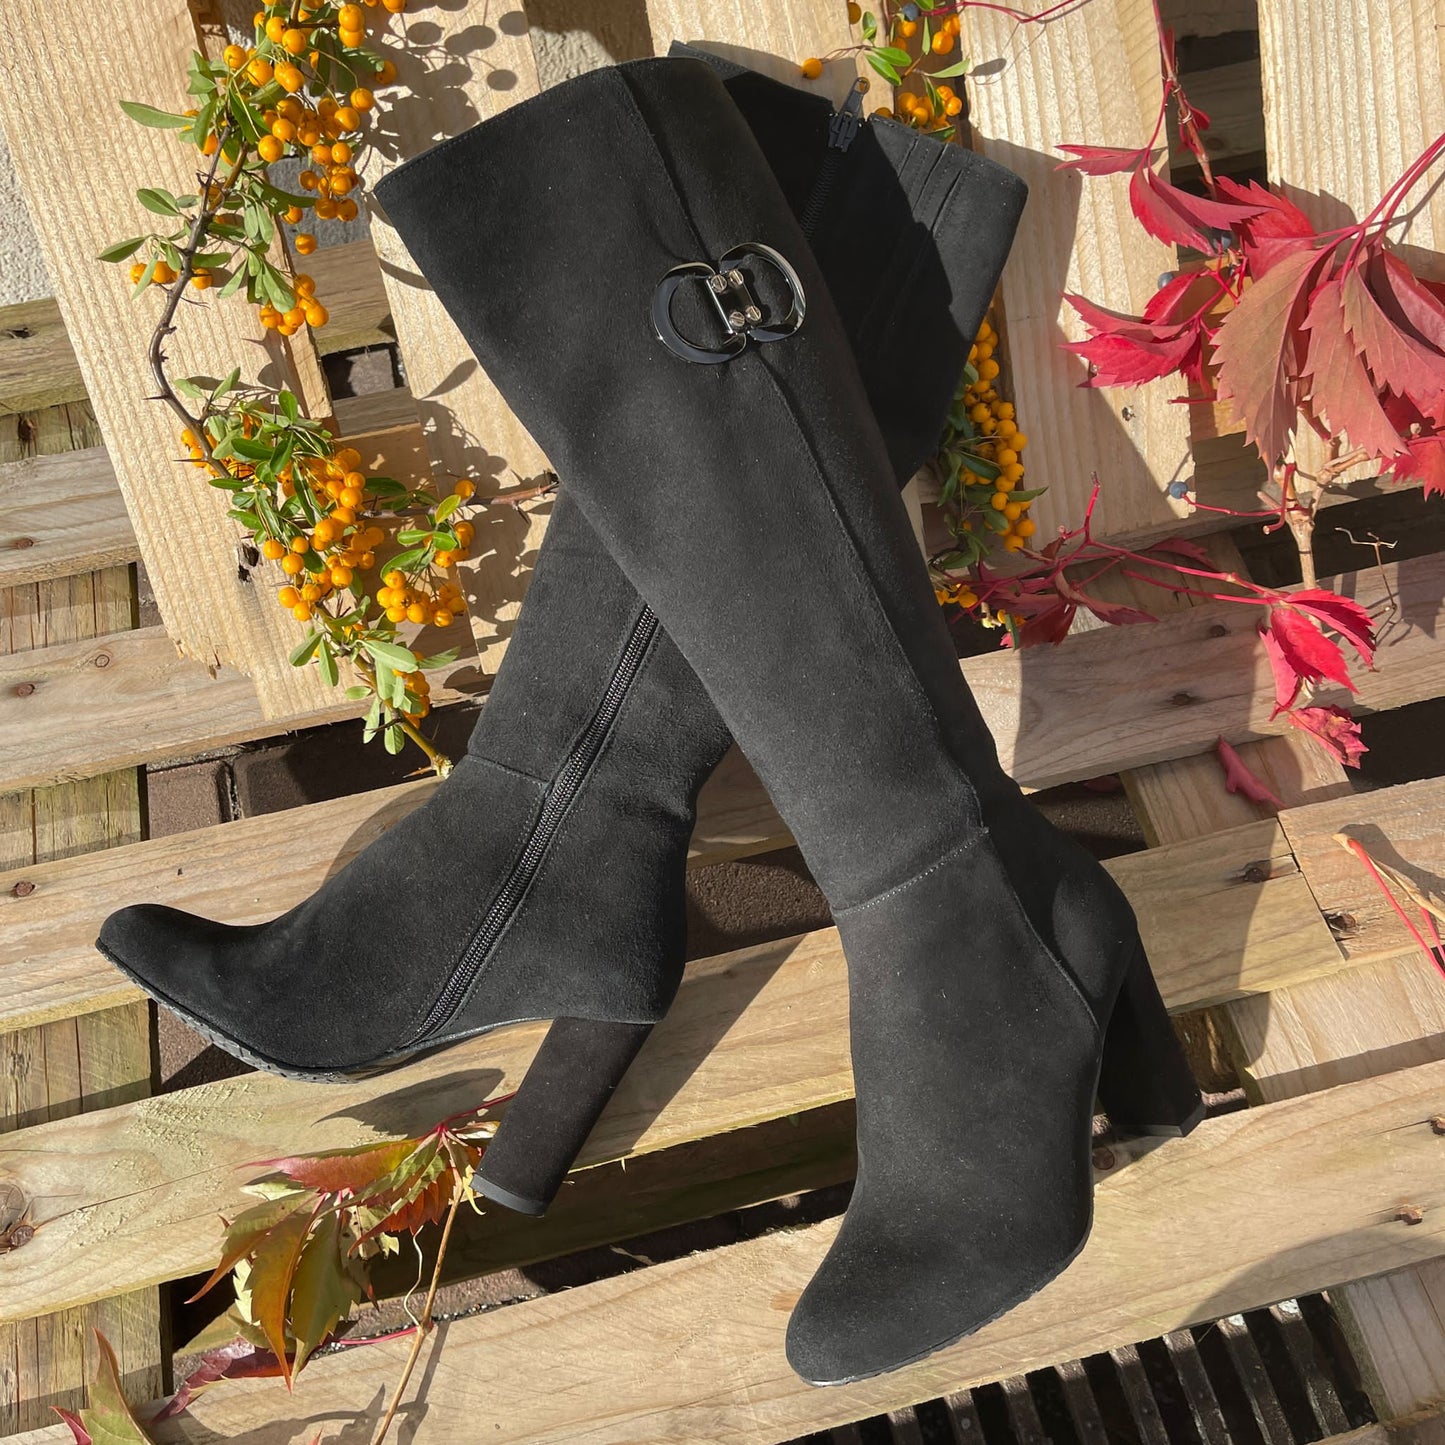 Petite size black suede knee high boots